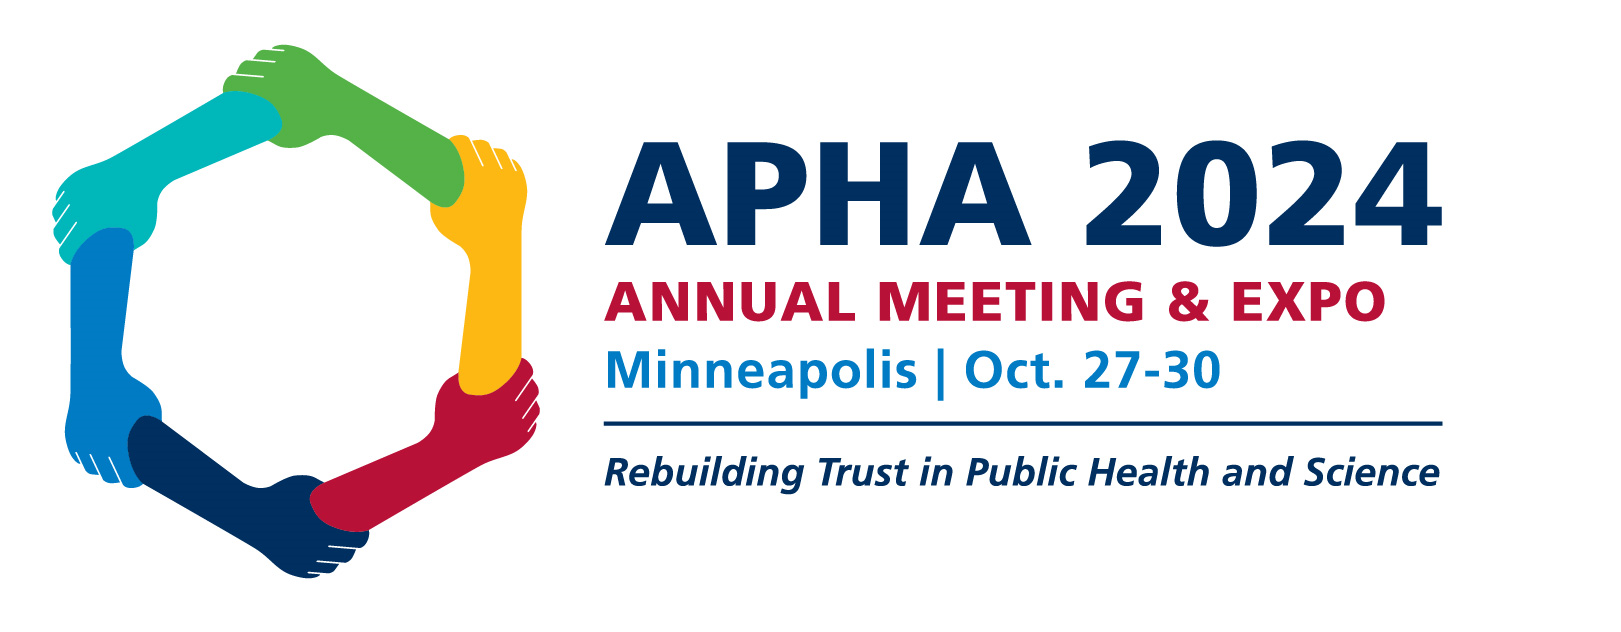 APHA 2024 Annual Meeting and Expo